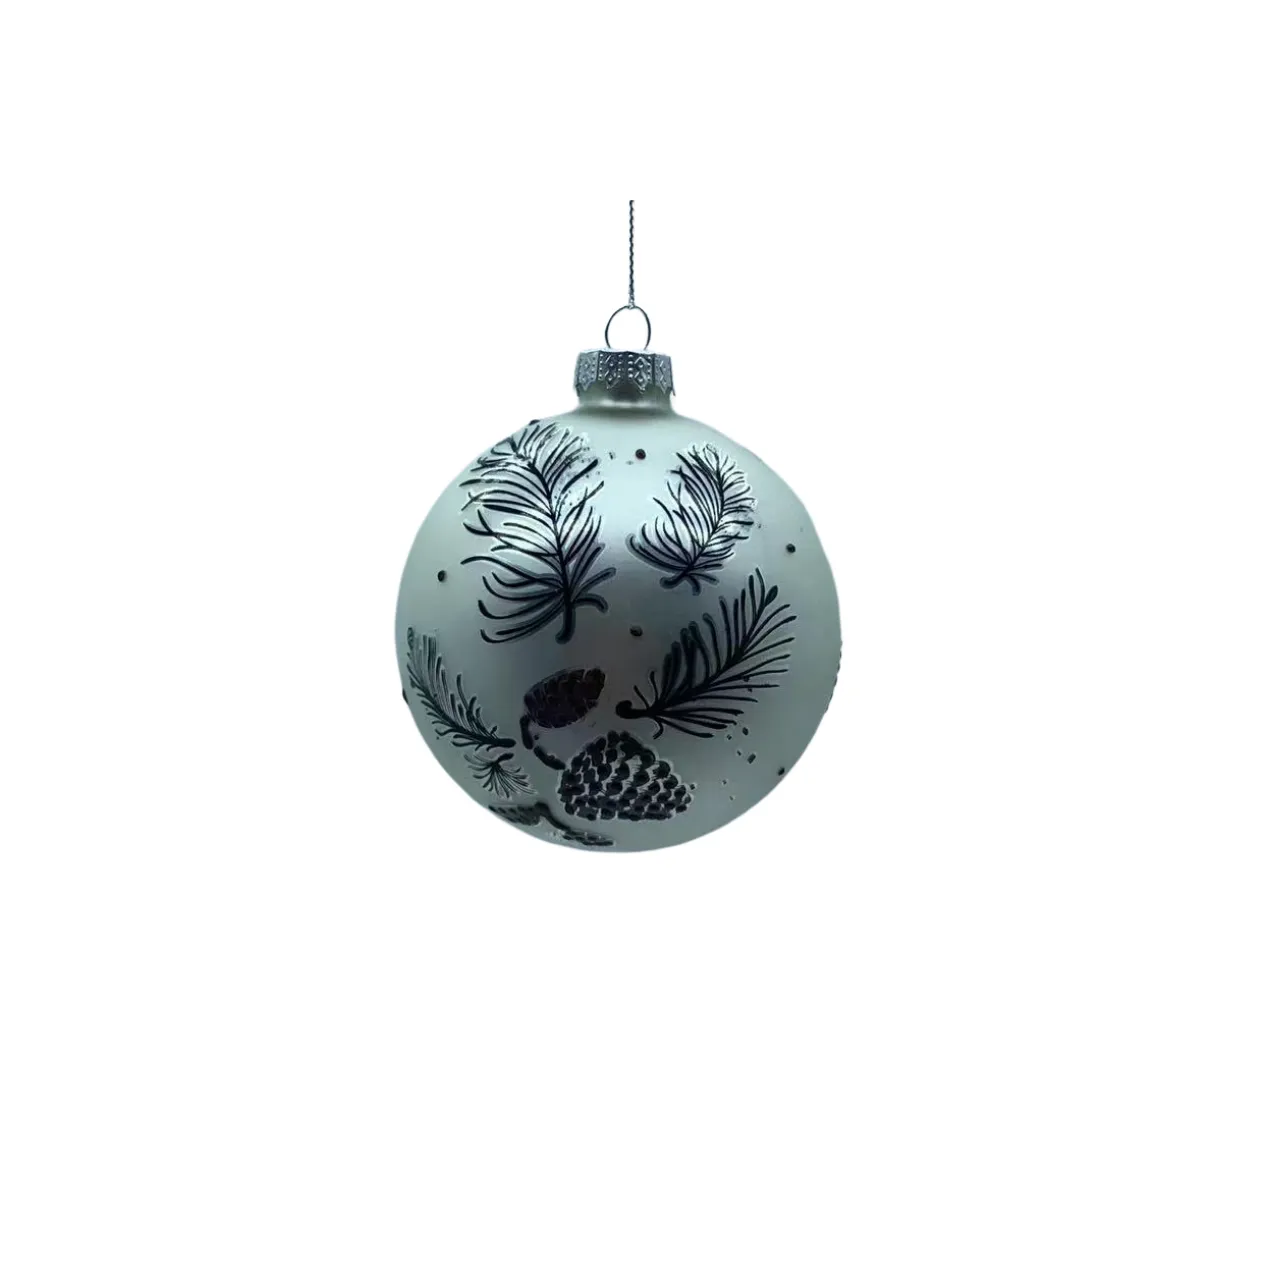 Hot sale Christmas tree decorations Modern holiday decorations Multicolor glass ball